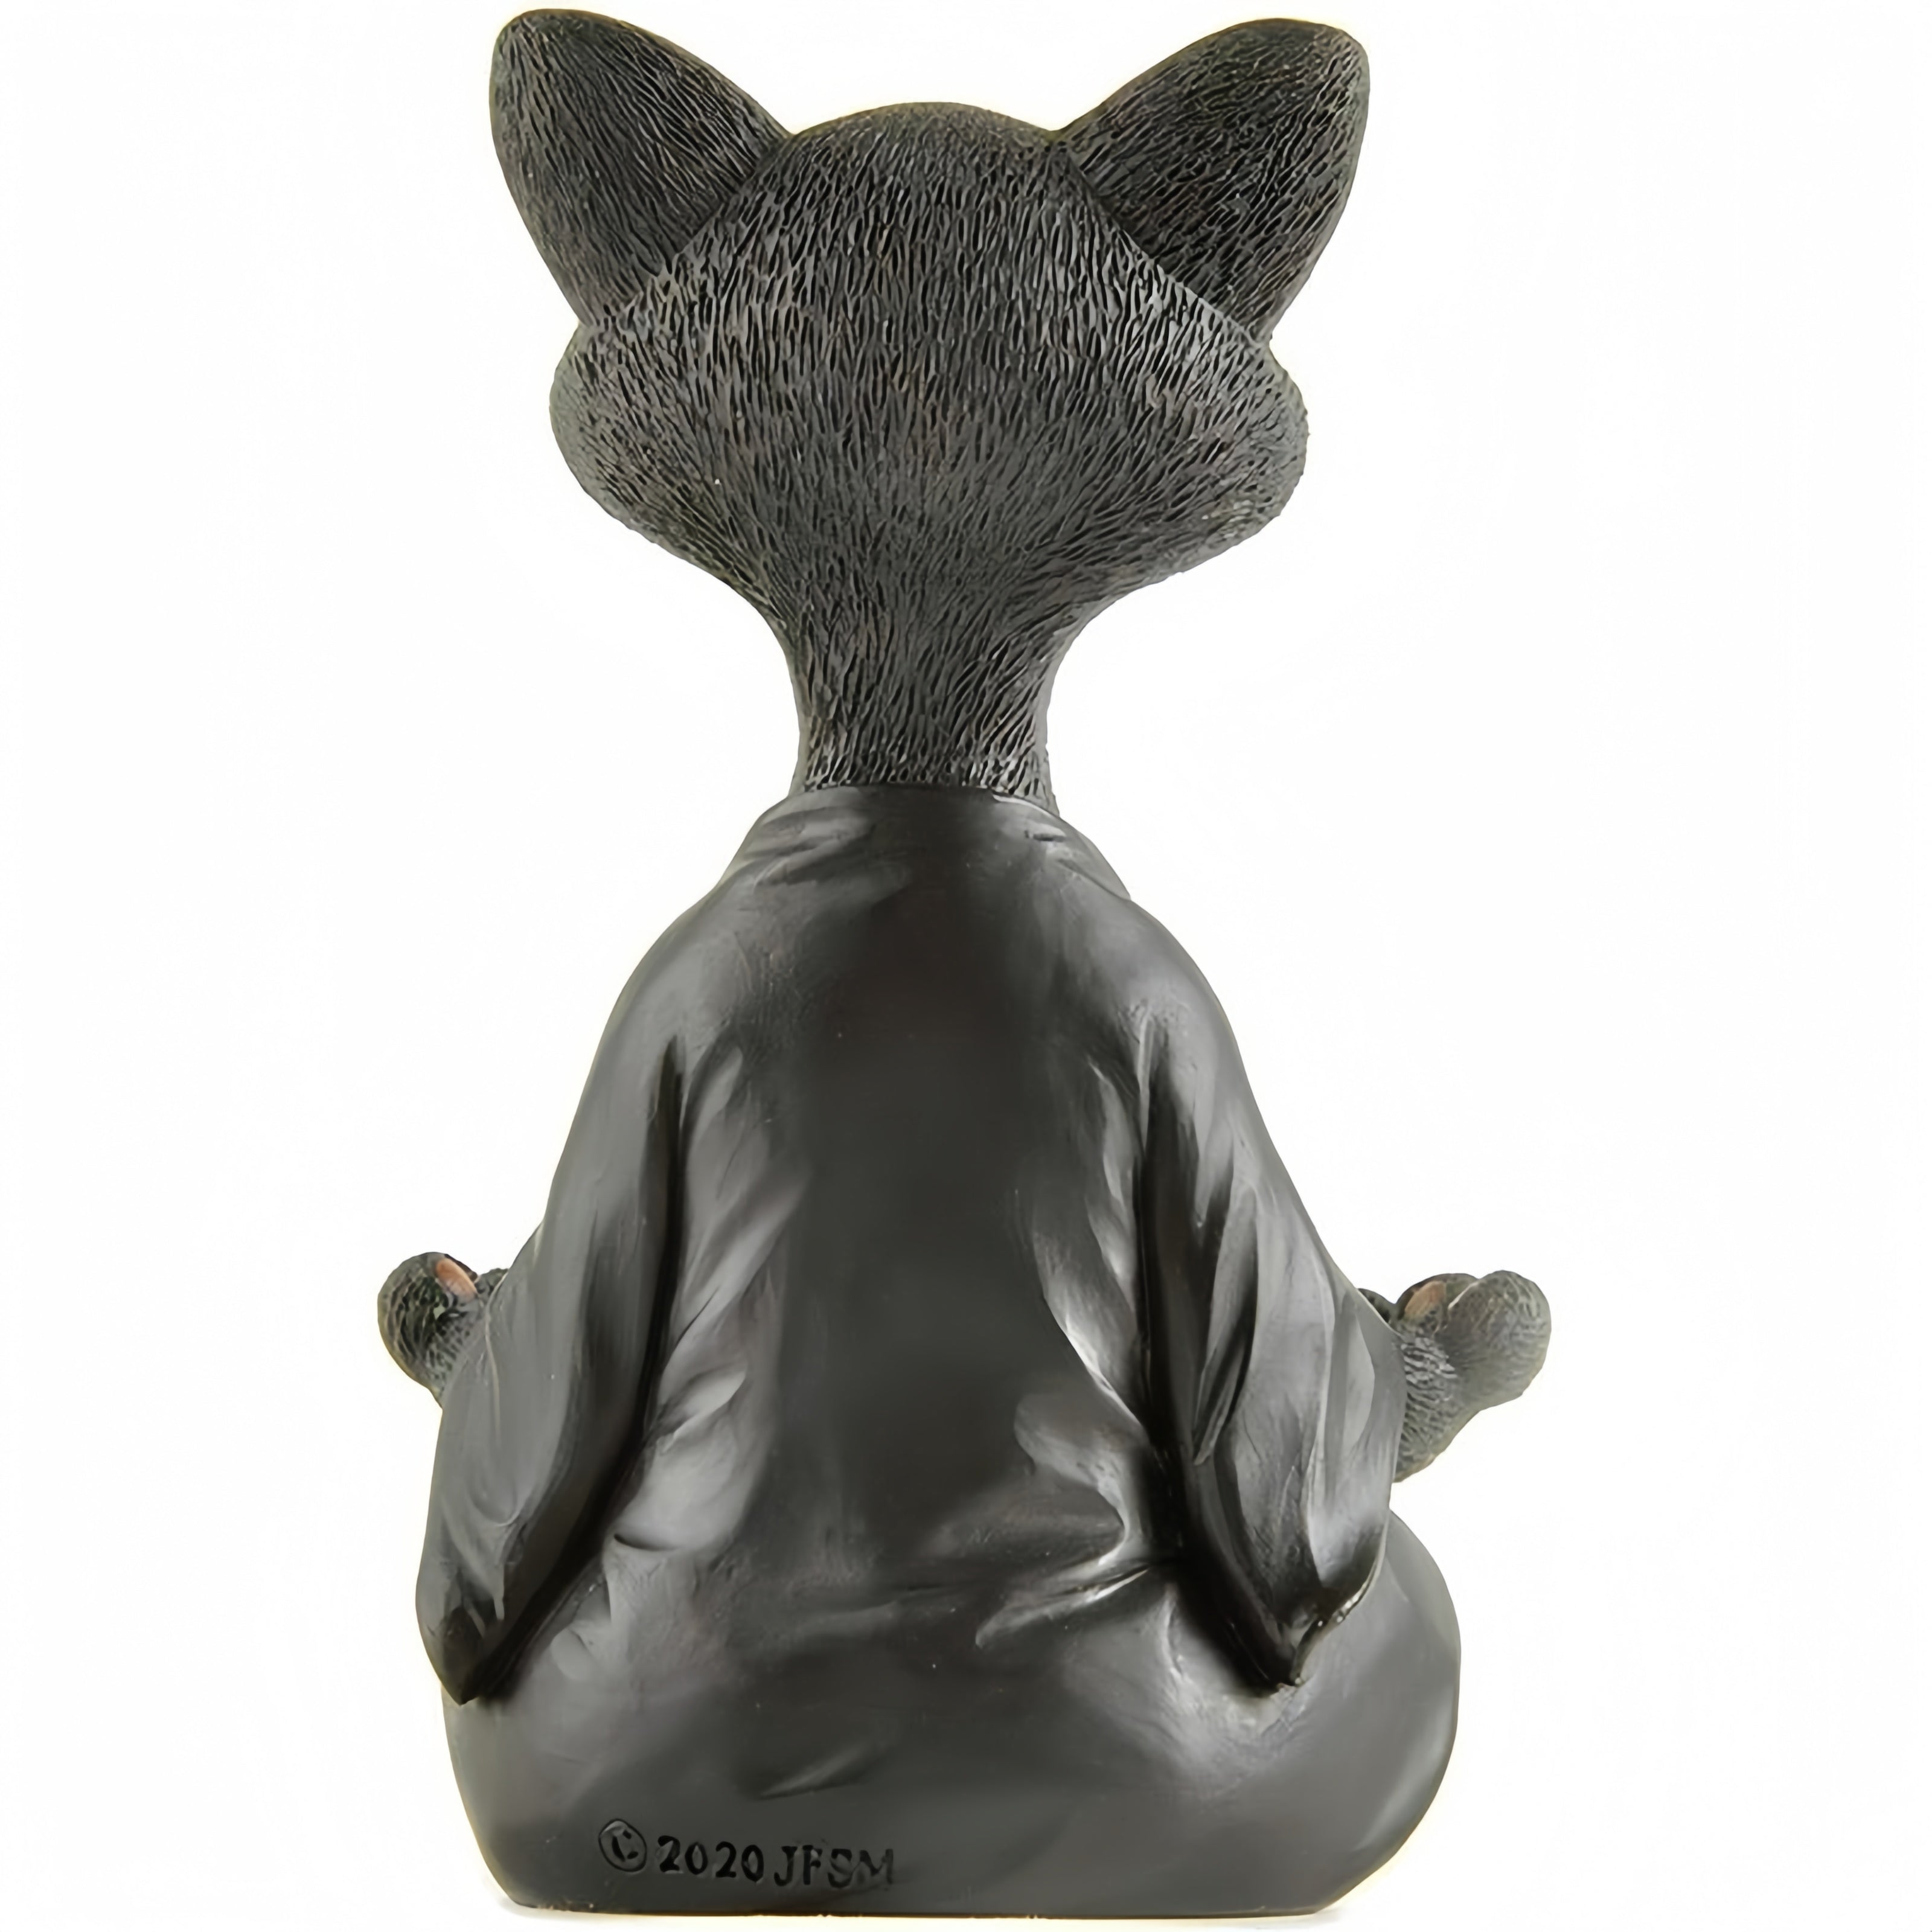 Back view of meditation cat statue